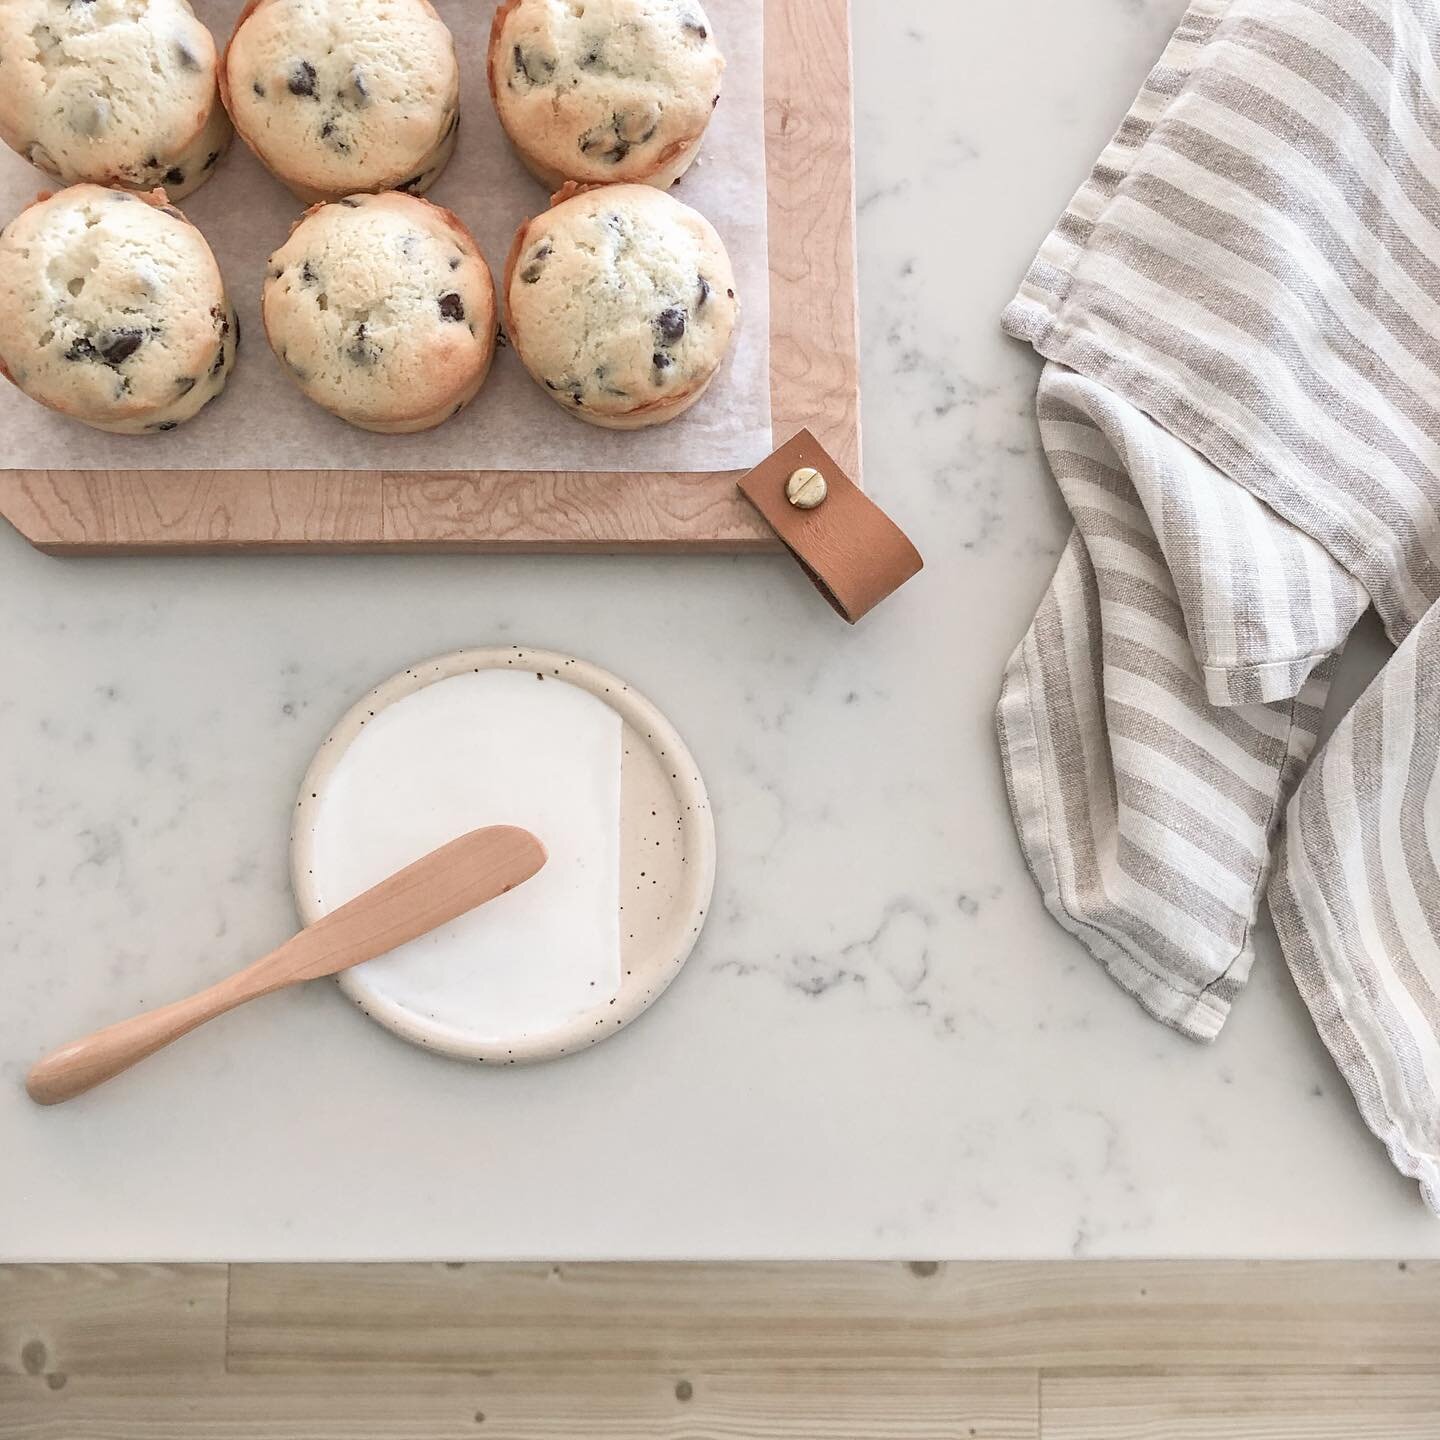 Sunday baking ✨ I have some spoon rests available online. 

#tokenhomegoods
#tokenceramics